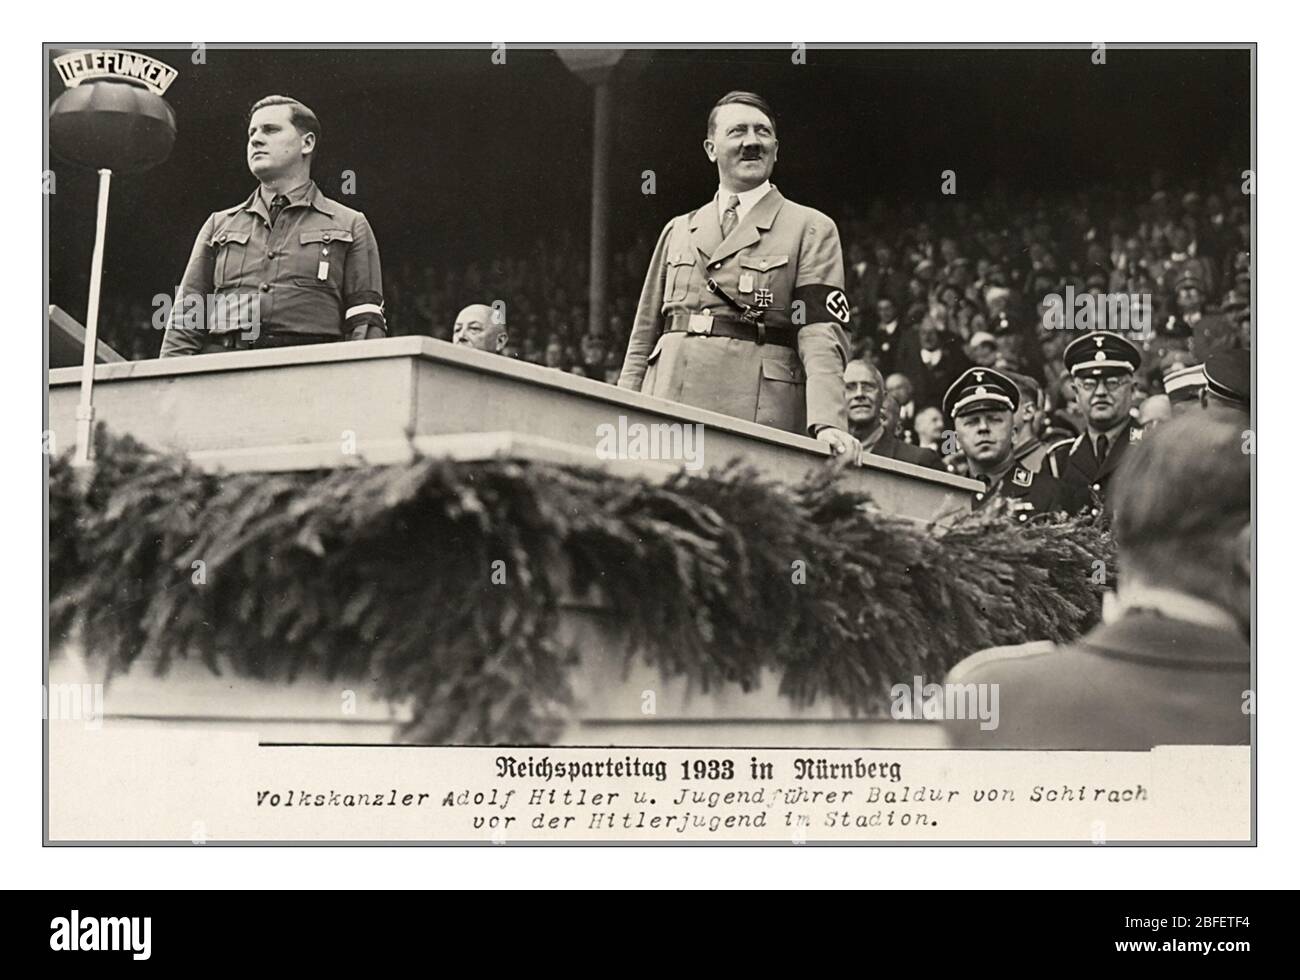 Adolf Hitler Reichsparteitag 1933 Archive Propaganda vintage photo of People's Chancellor Adolf Hitler in military uniform with swastika armband and youth leader Baldur von Schirach in front of the Hitler Youth in the stadium Reichsparteitag 1933 in Nurnberg Nazi Germany Stock Photo